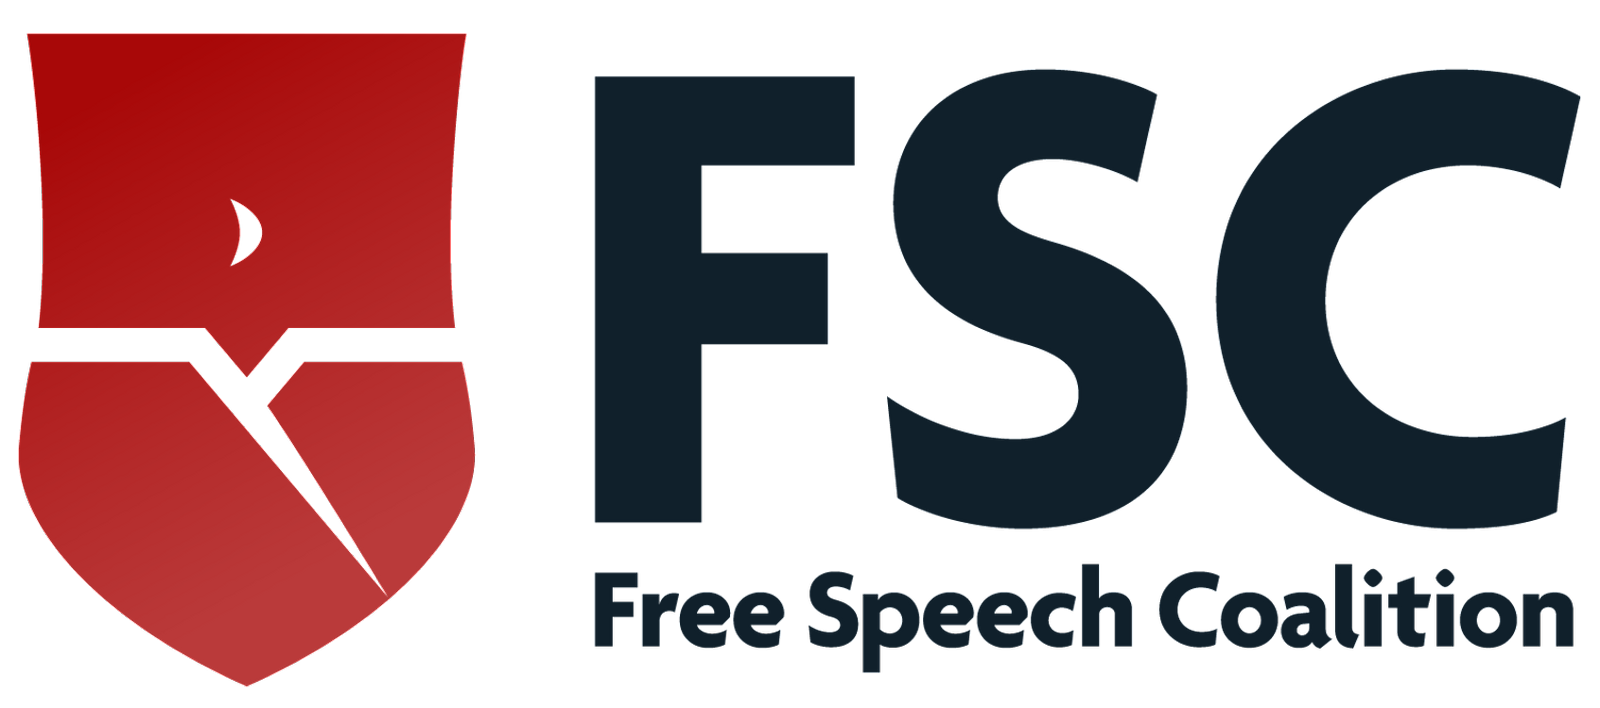 NakedSword Forms Partnership with Free Speech Coalition